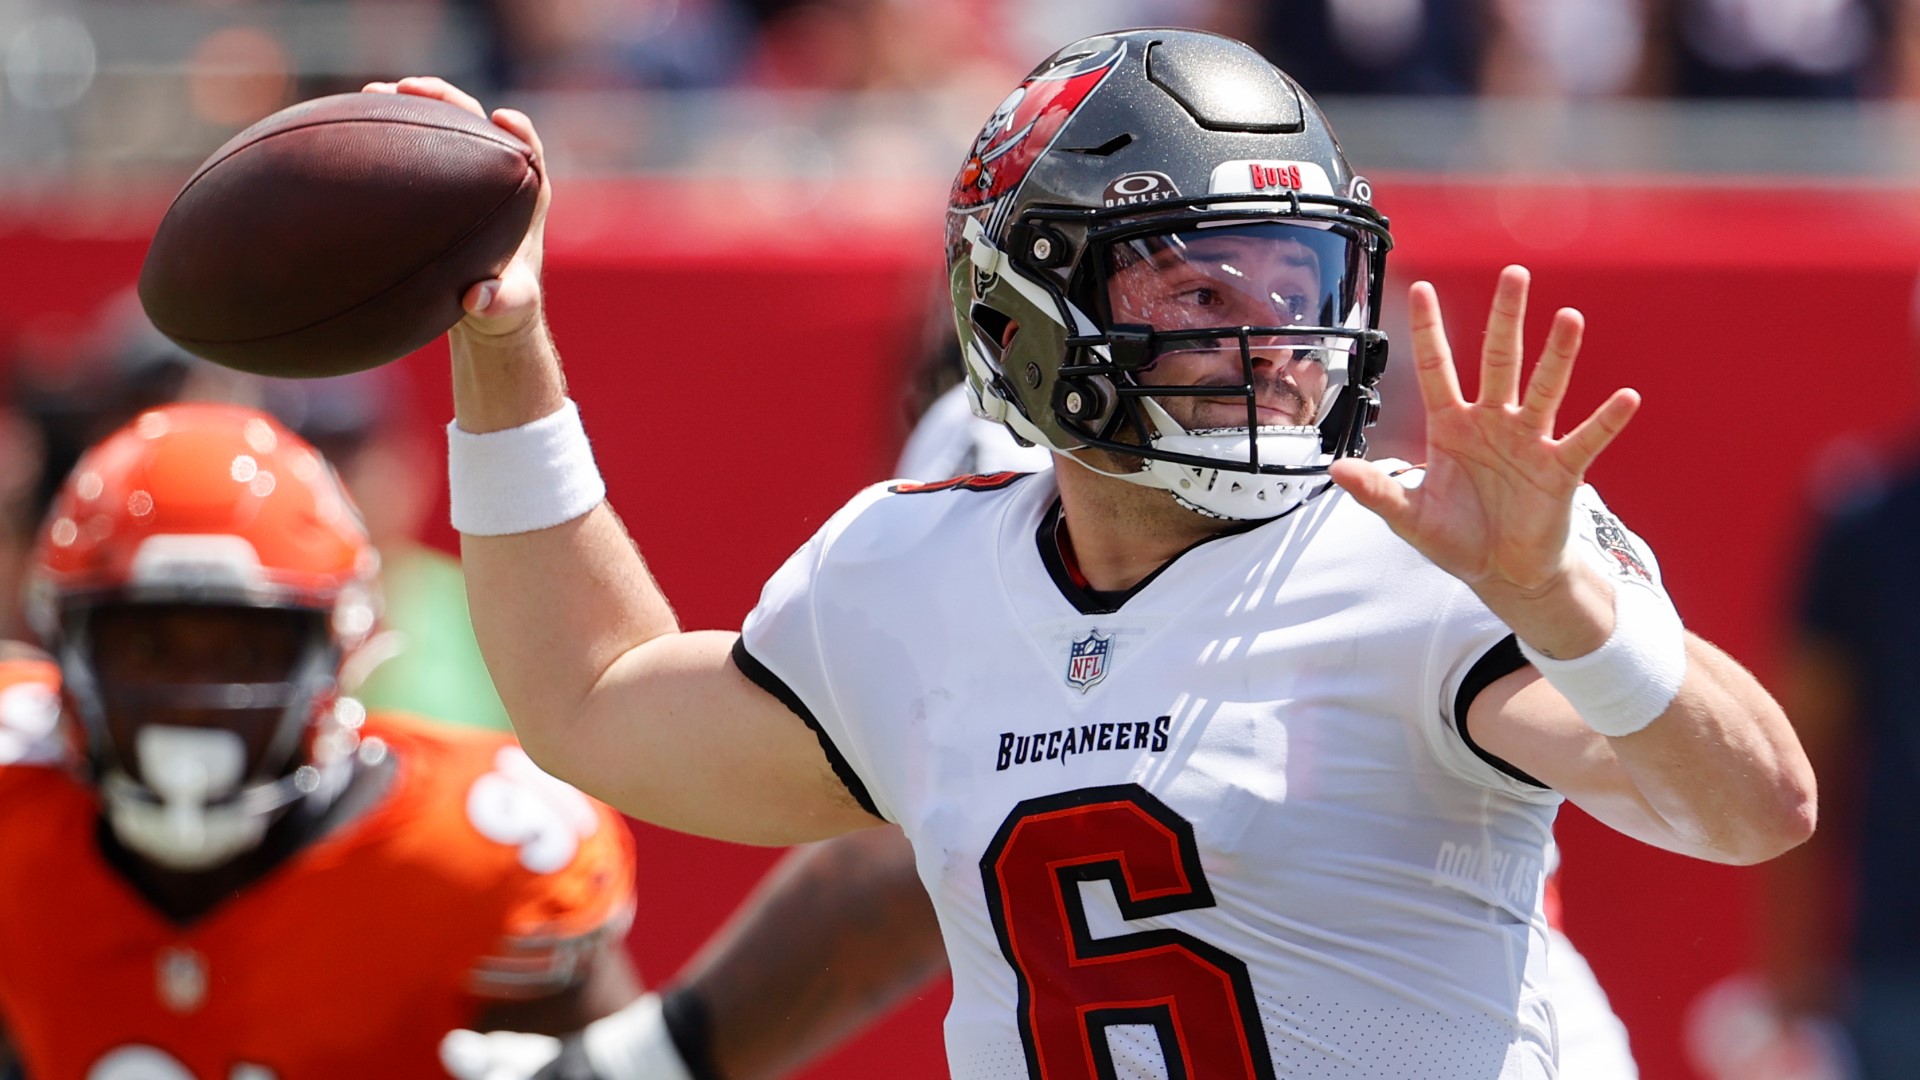 The Bucs improved to 2-0 while handing the Bears a franchise-record 12th consecutive loss.